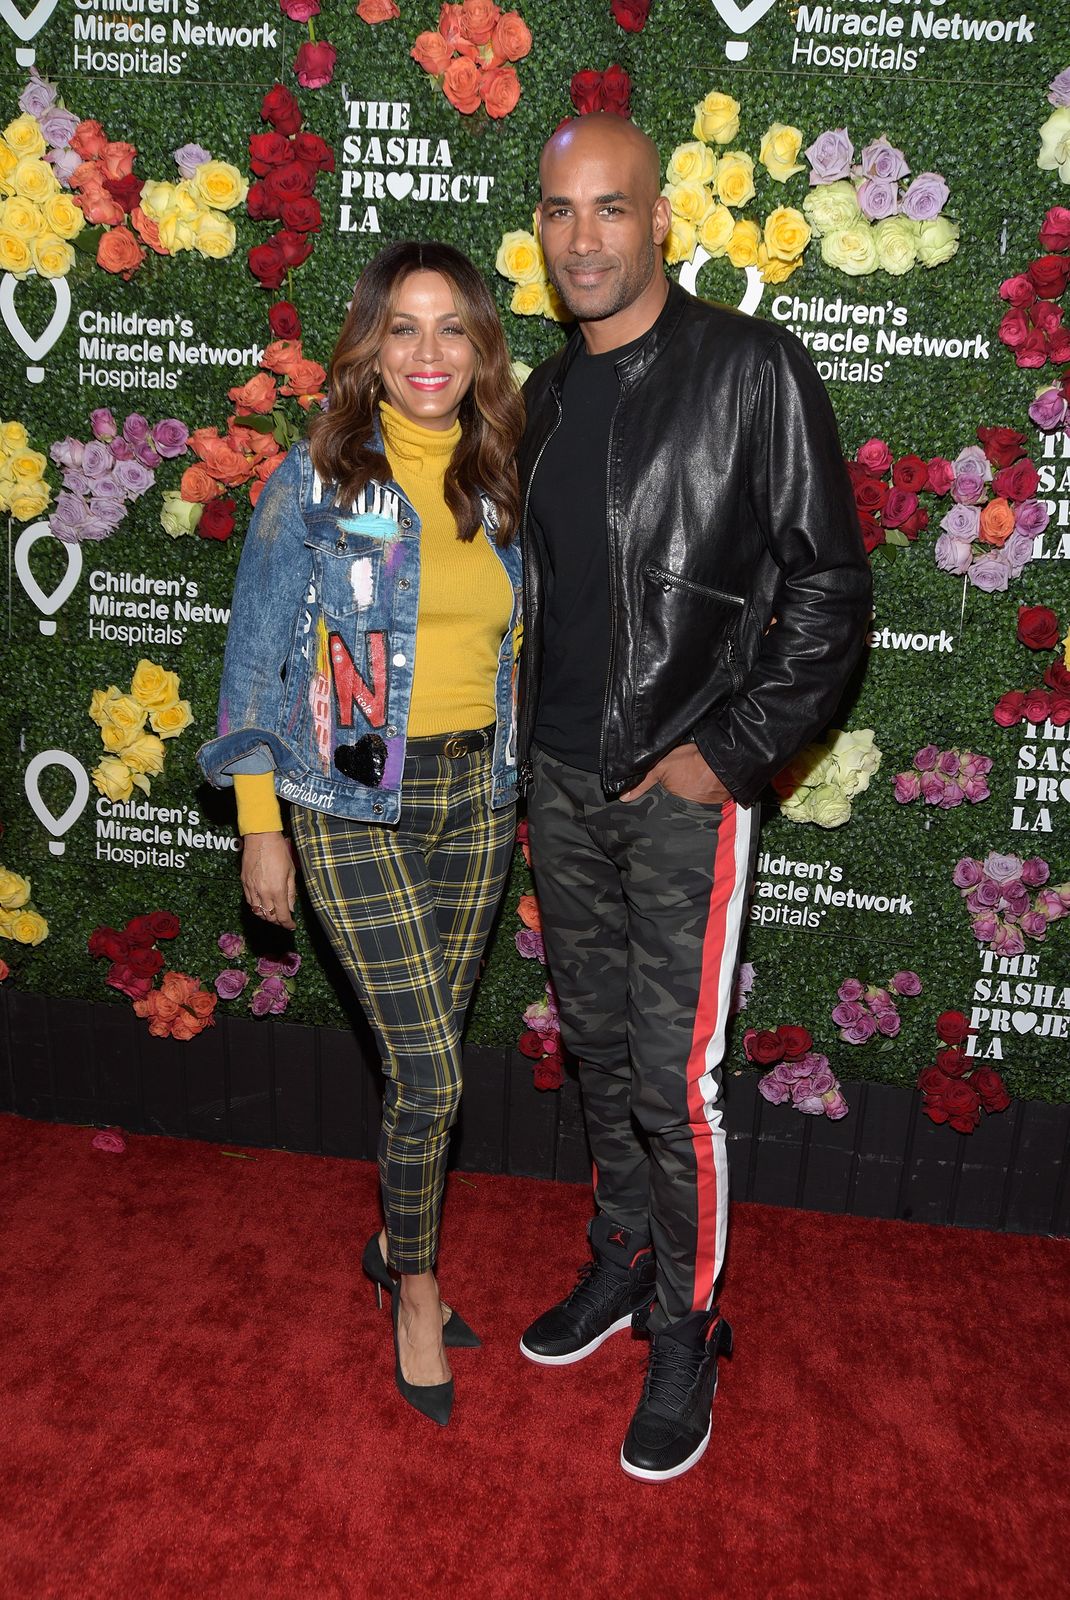 Nicole Ari Parker and Boris Kodjoe attend "Rock the Runway" presented by Children's Miracle Network Hospitals at Avalon on October 13, 2018. | Photo: Getty Images